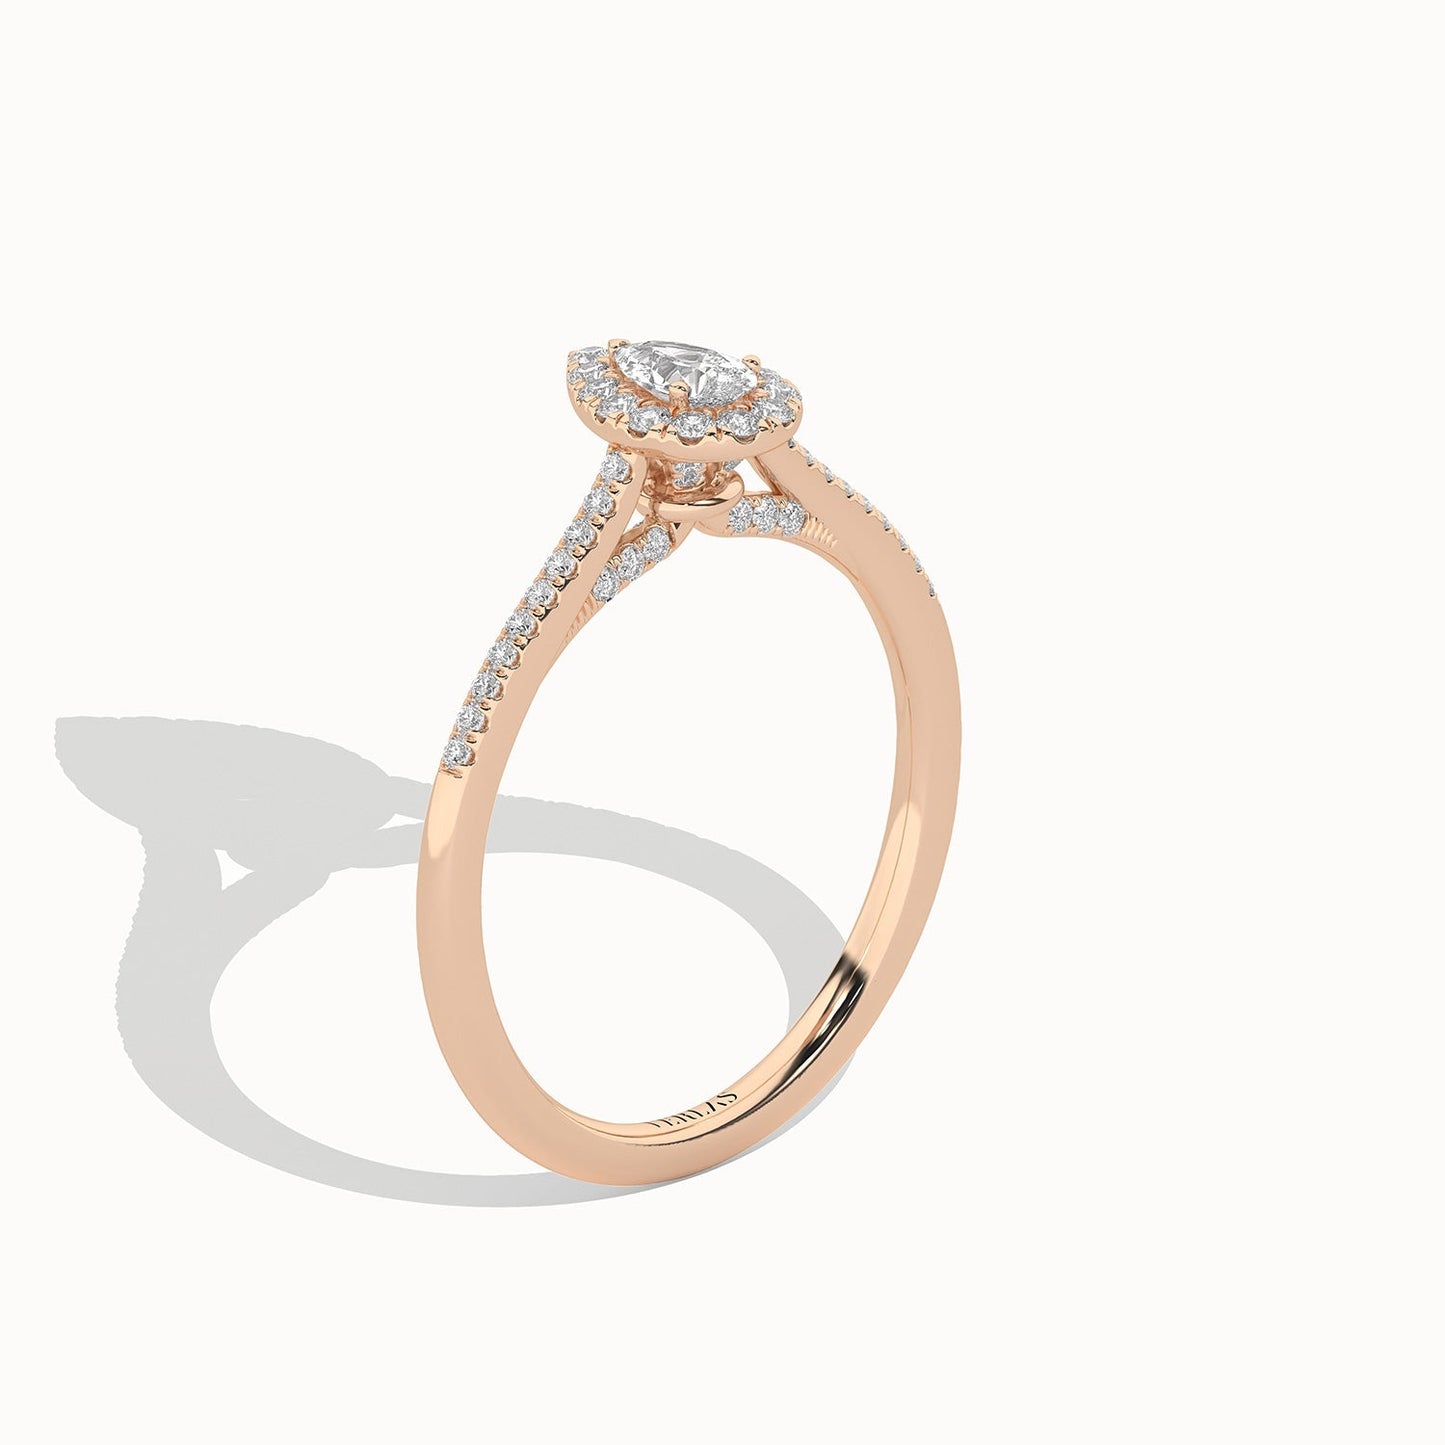 Signature Dewdrop Halo Ring_Product Angle_1/3Ct - 4